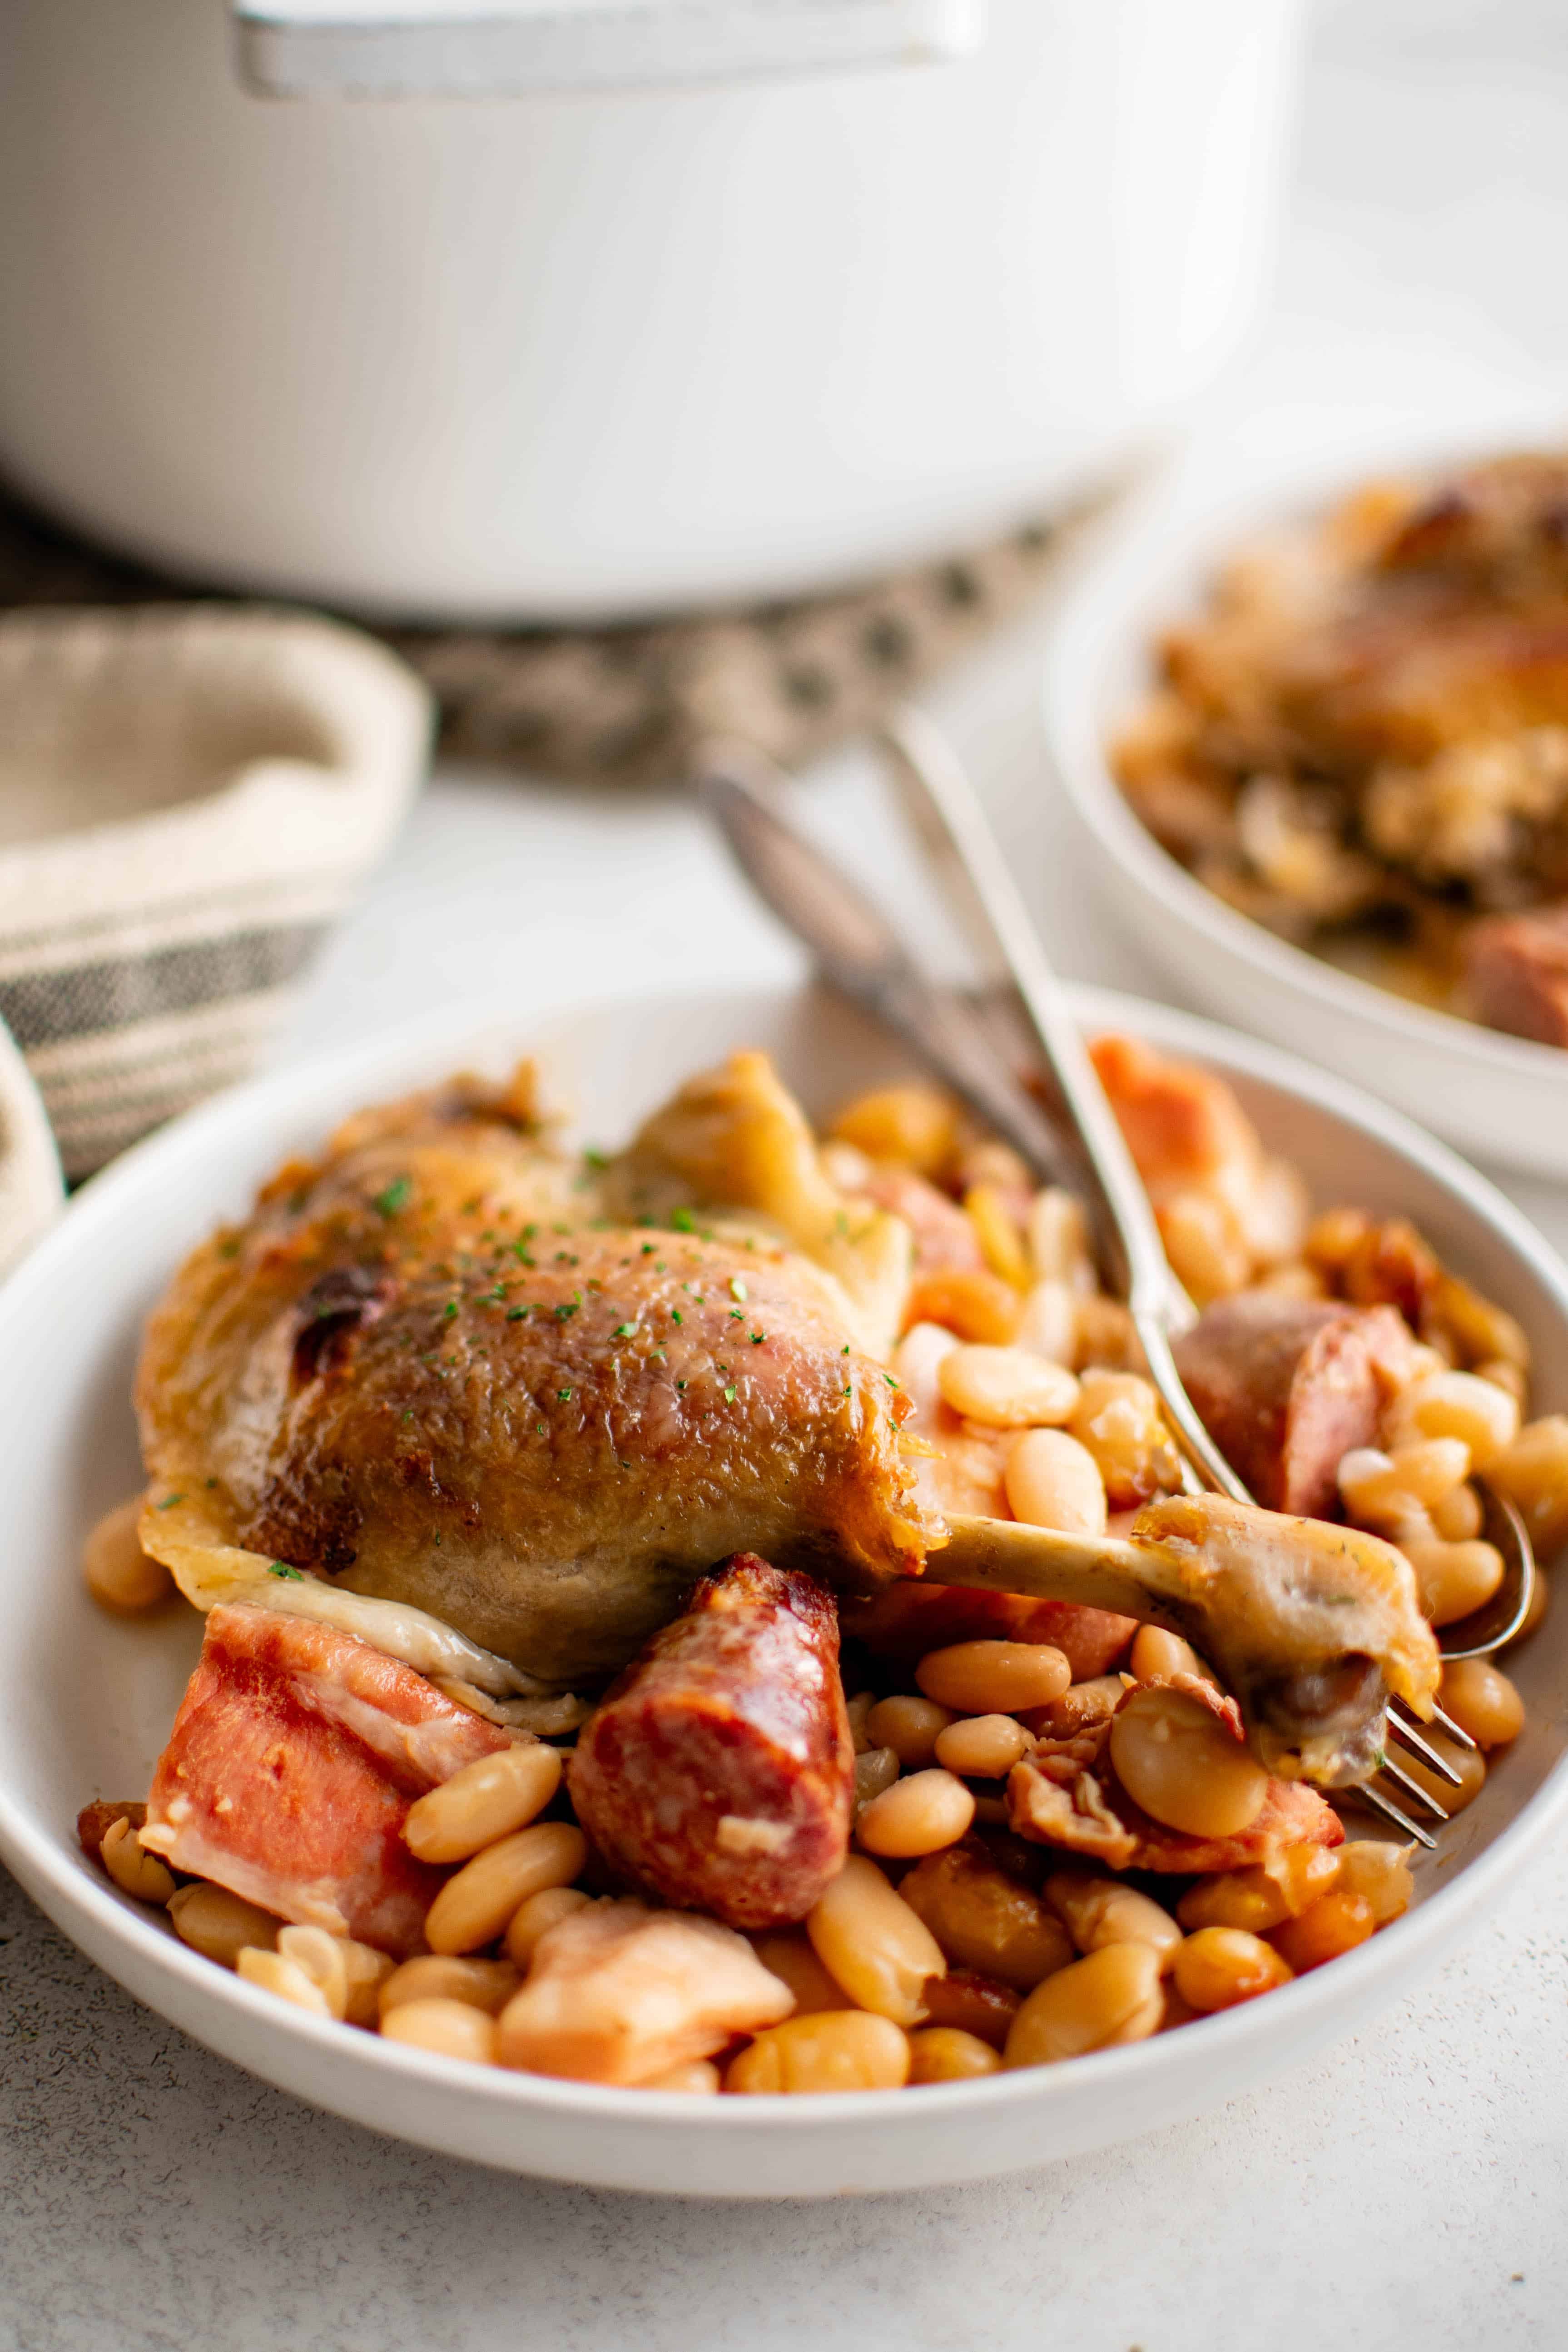 White dinner plate filled with a serving of cassoulet consisting of sausage, pork belly, beans, and duck leg.